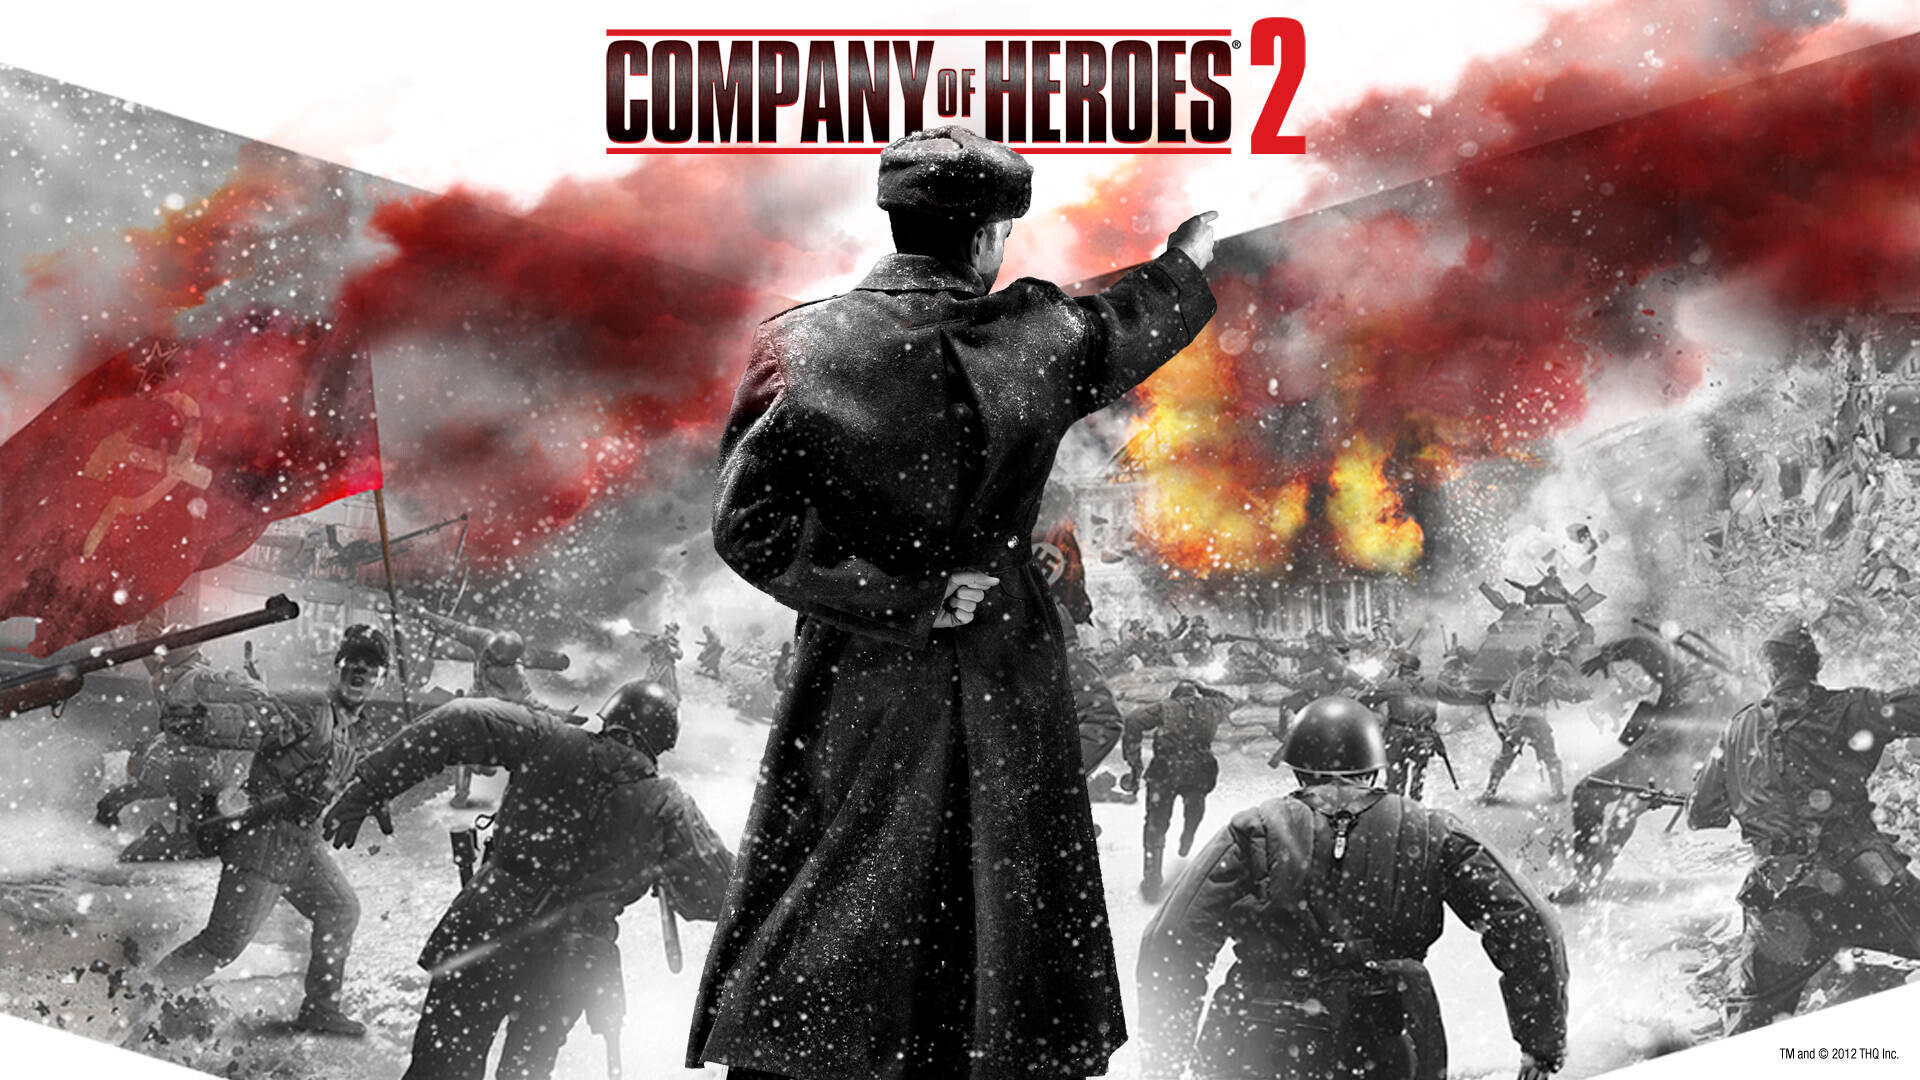 Company of Heroes 2: Sequel to the Highest Rated Strategy Game